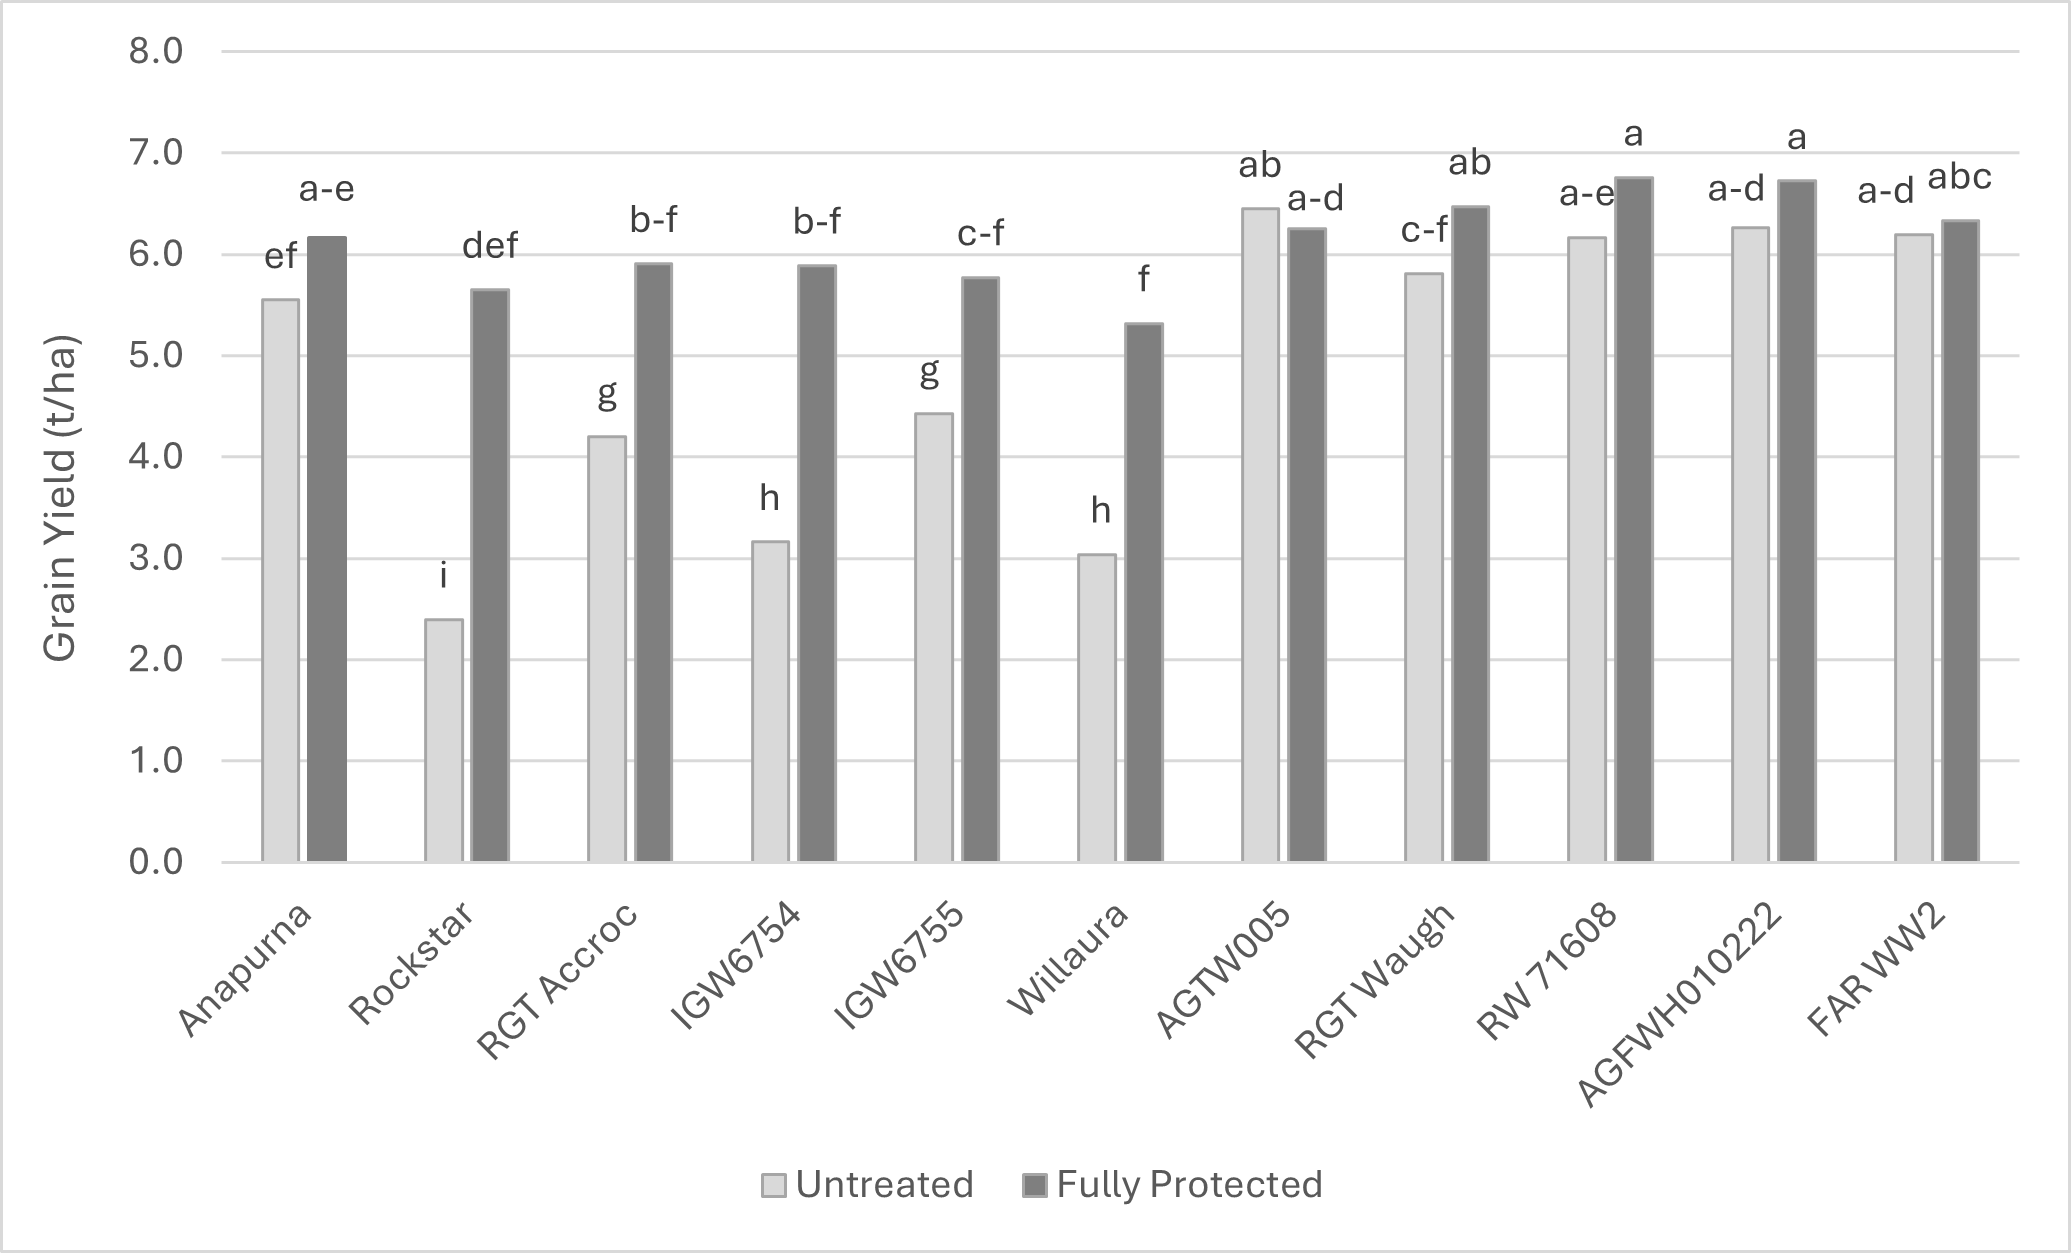 Influence of cultivar and fungicide application on grain yield (t/ha). Bars with the same letters are not significantly different (p=0.05).